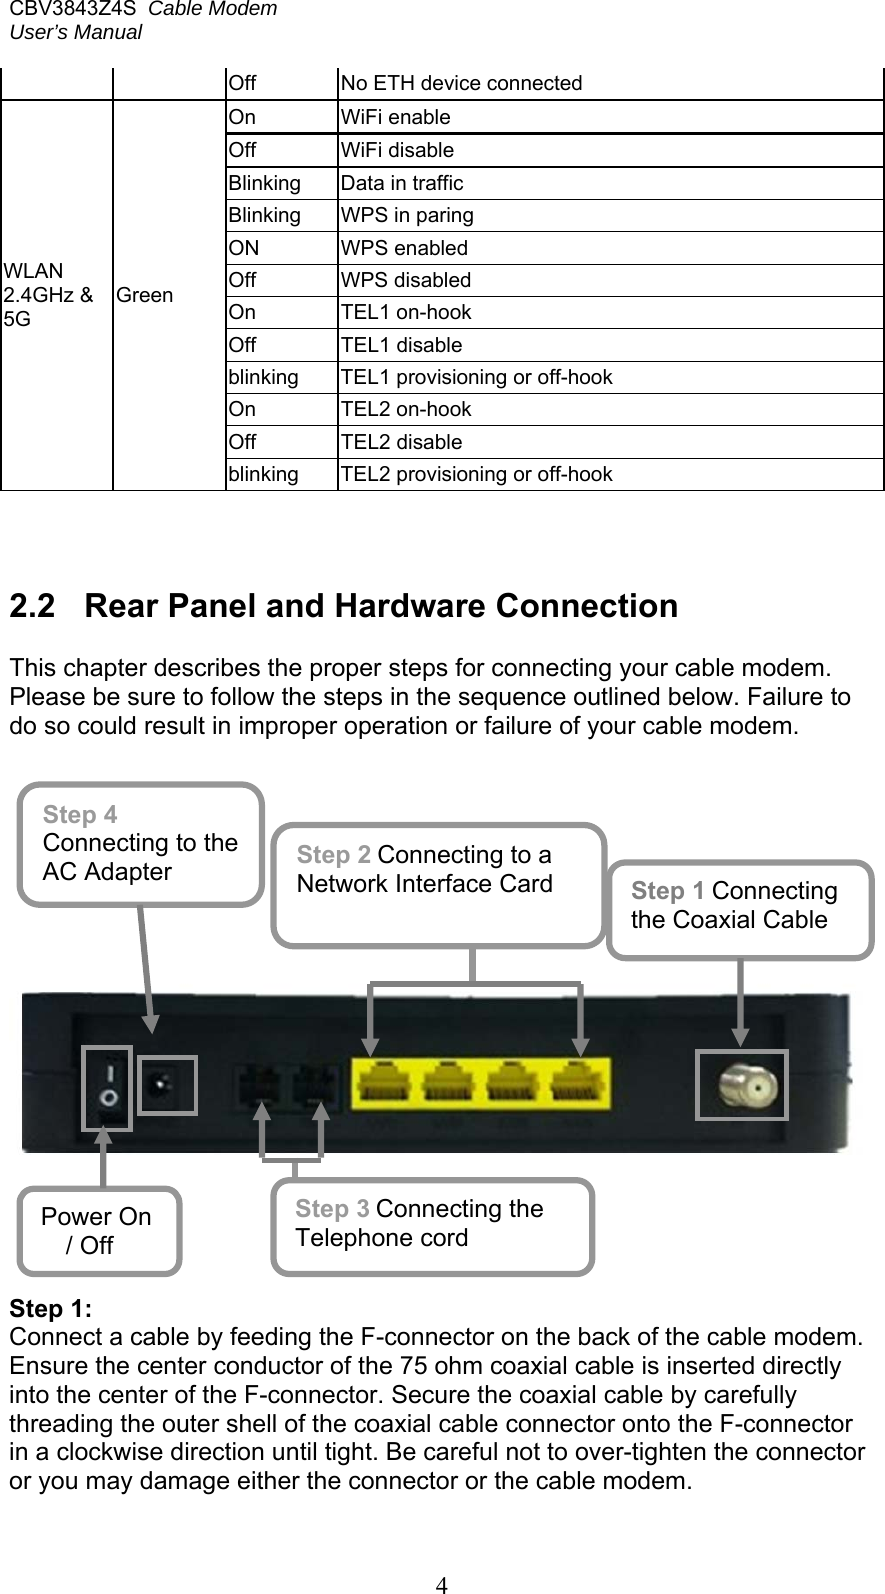 CBV3843Z4S  Cable Modem  User’s Manual   4 Off   No ETH device connected  WLAN 2.4GHz &amp; 5G Green On   WiFi enable Off   WiFi disable Blinking  Data in traffic Blinking  WPS in paring ON  WPS enabled Off  WPS disabled  On   TEL1 on-hook Off   TEL1 disable blinking  TEL1 provisioning or off-hook On   TEL2 on-hook Off   TEL2 disable blinking  TEL2 provisioning or off-hook    2.2  Rear Panel and Hardware Connection  This chapter describes the proper steps for connecting your cable modem. Please be sure to follow the steps in the sequence outlined below. Failure to do so could result in improper operation or failure of your cable modem.              Step 1: Connect a cable by feeding the F-connector on the back of the cable modem. Ensure the center conductor of the 75 ohm coaxial cable is inserted directly into the center of the F-connector. Secure the coaxial cable by carefully threading the outer shell of the coaxial cable connector onto the F-connector in a clockwise direction until tight. Be careful not to over-tighten the connector or you may damage either the connector or the cable modem.  Step 1 Connecting the Coaxial Cable Step 3 Connecting the Telephone cord Step 4 Connecting to the AC Adapter Step 2 Connecting to a Network Interface Card Power On / Off 